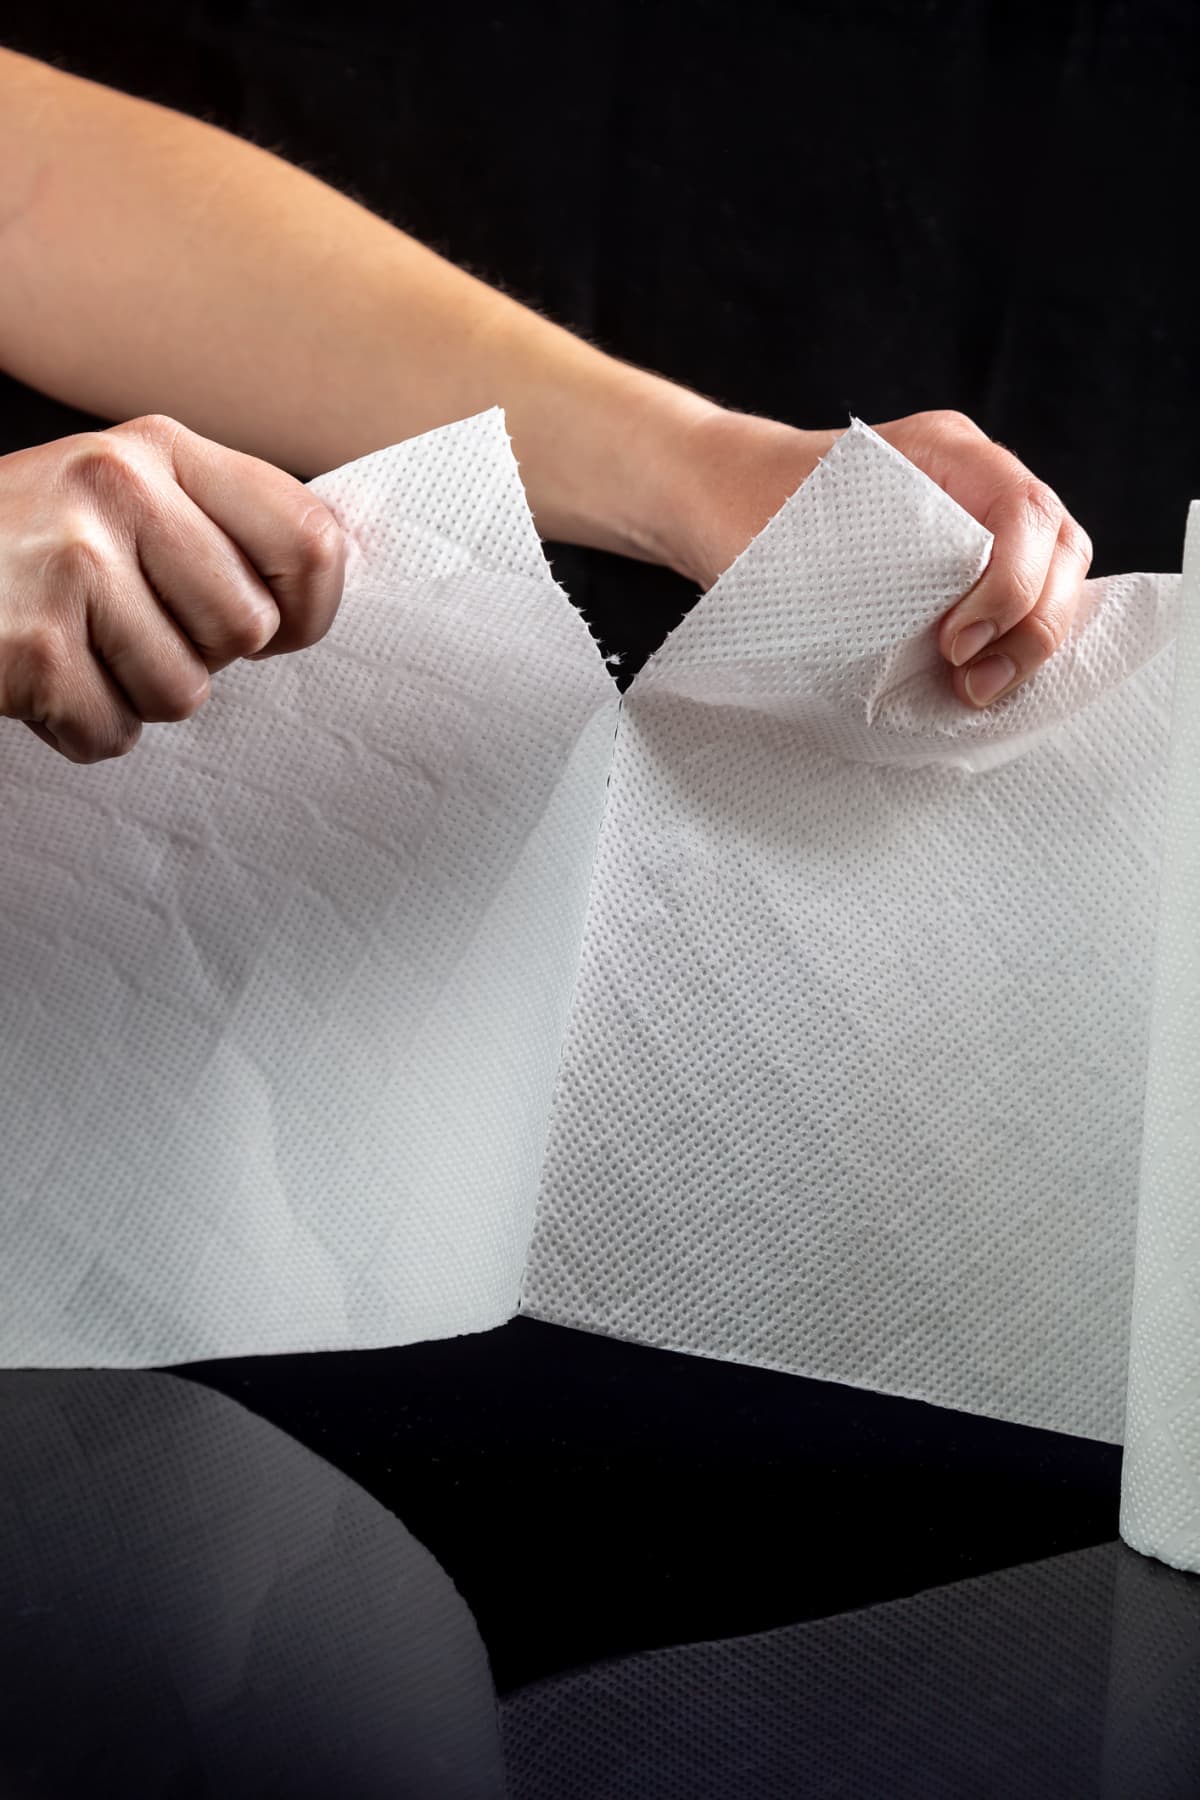 Hands tear off a piece of white paper towel from a roll on a black background. Vertical orientation. High quality photo.